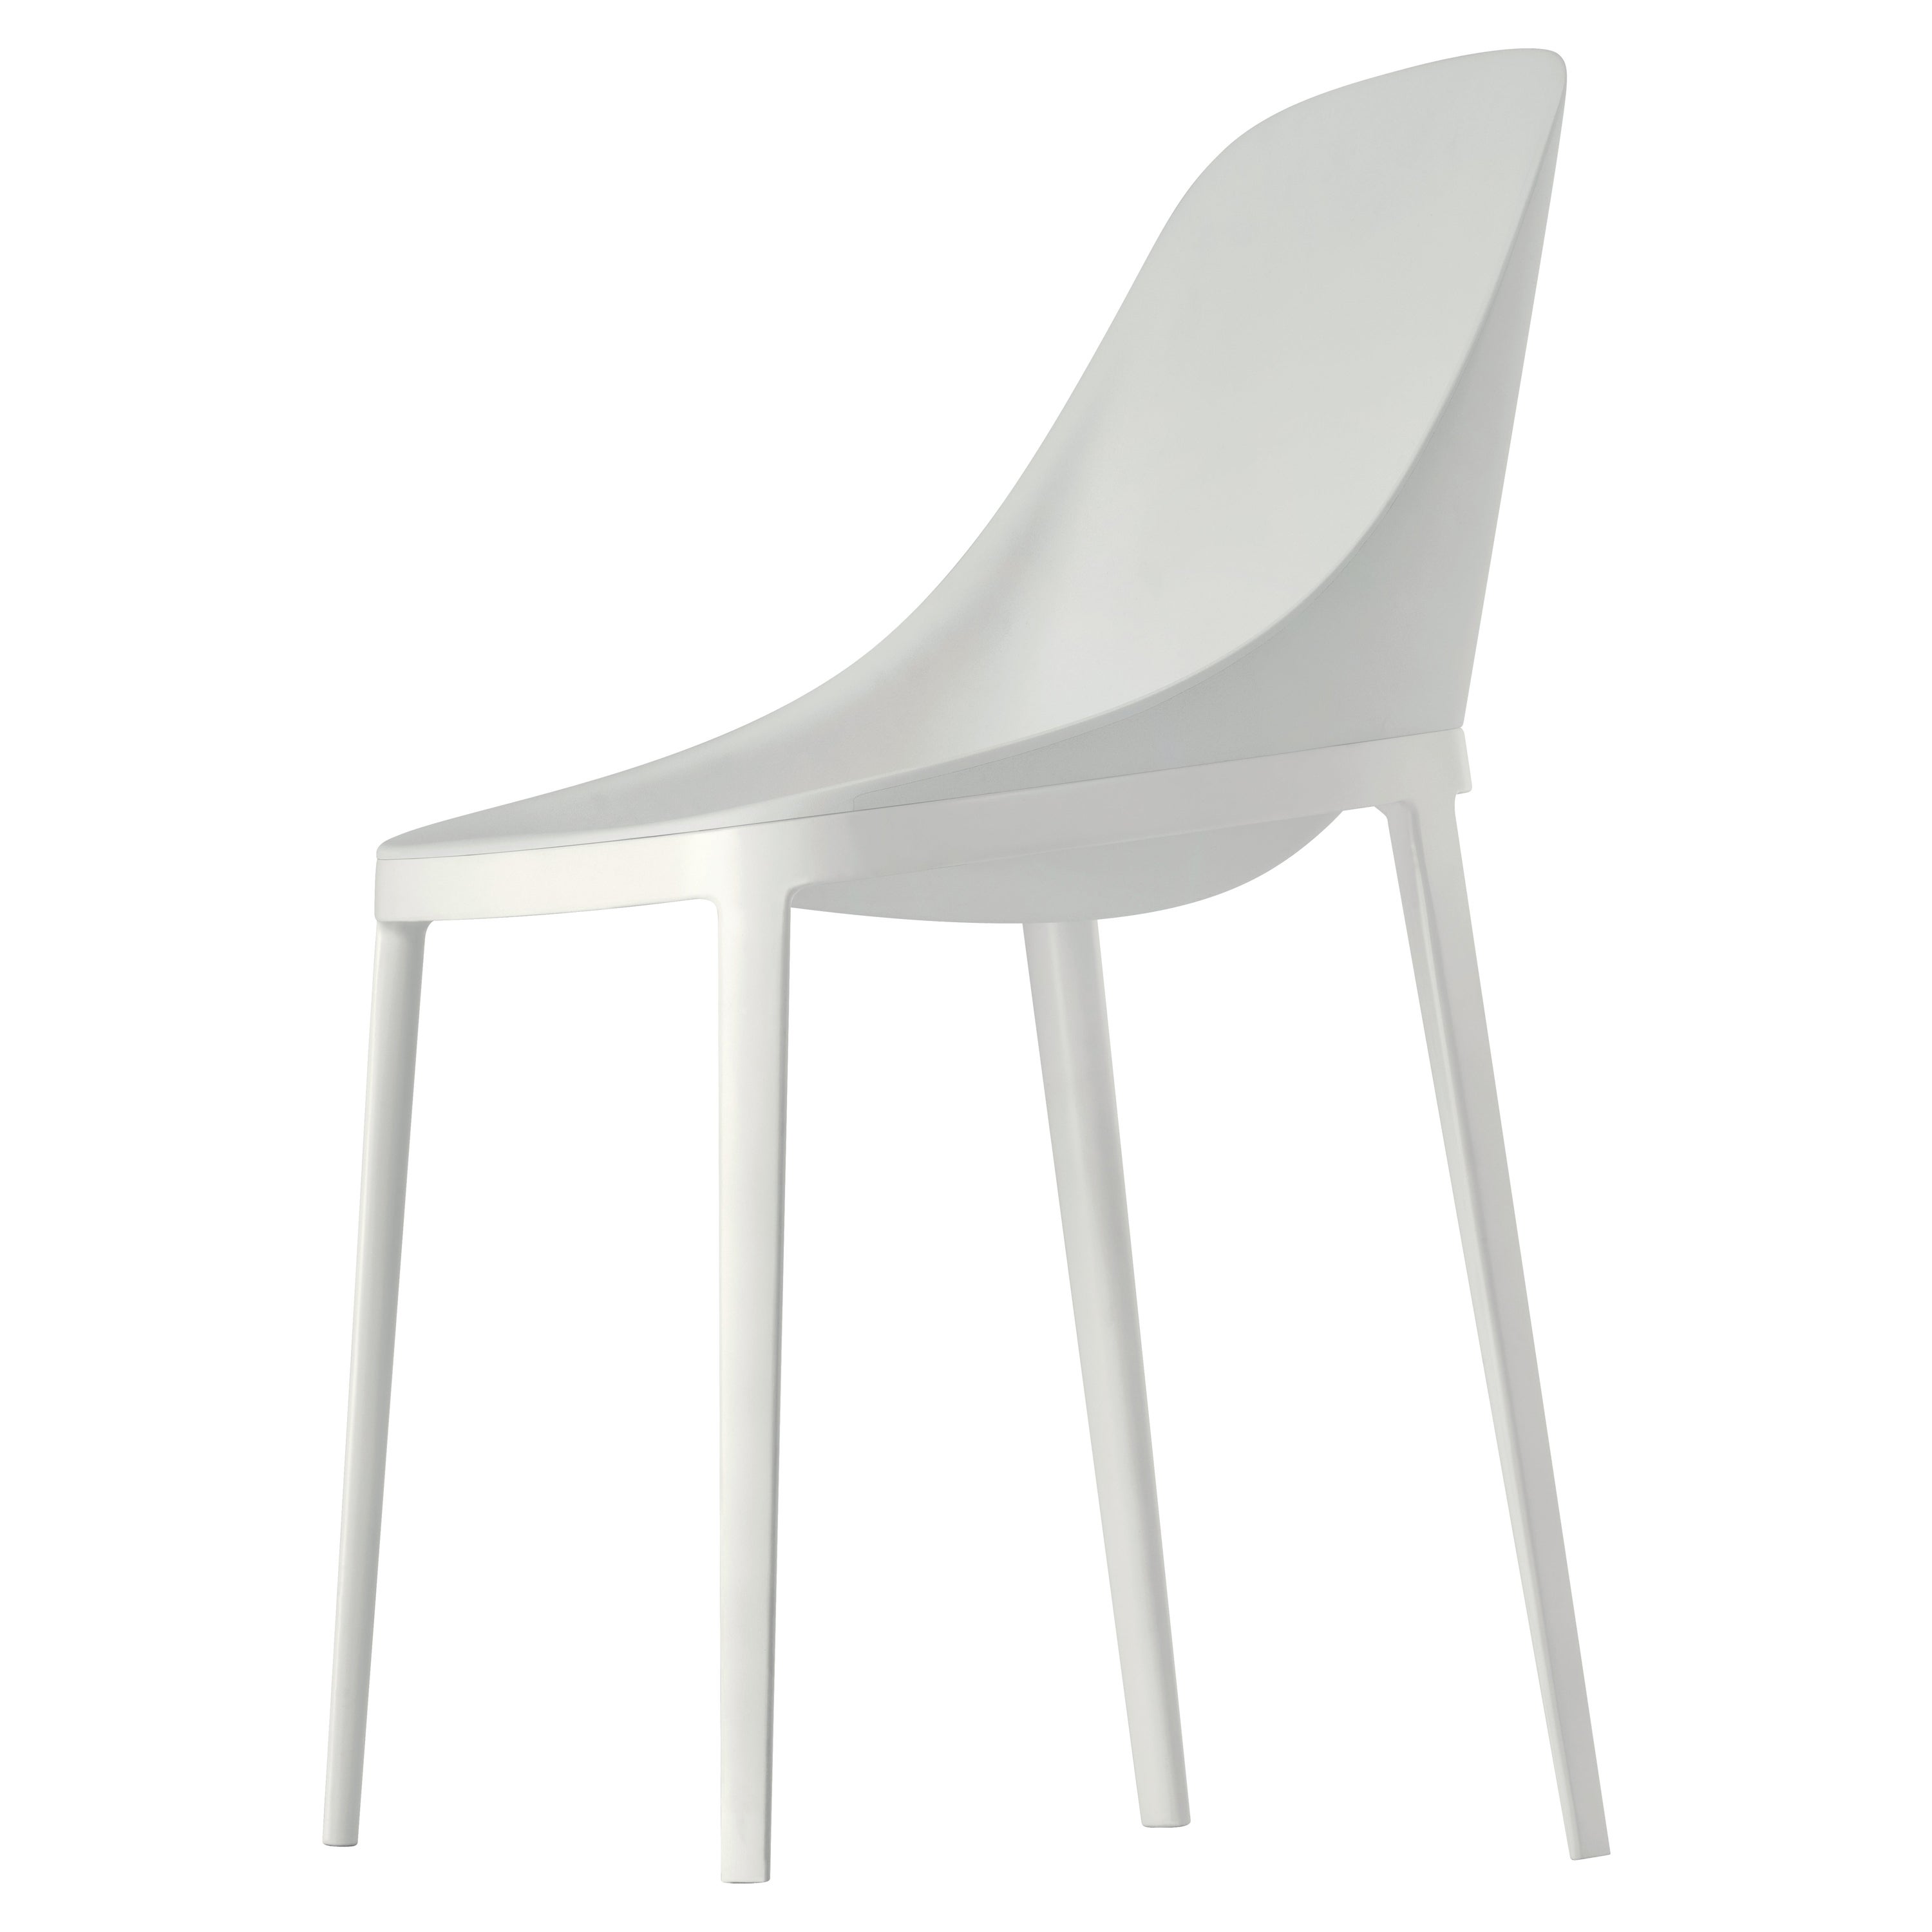 Alias 070 Elle Chair in White with Lacquered Aluminum Frame by Eugeni Quitllet